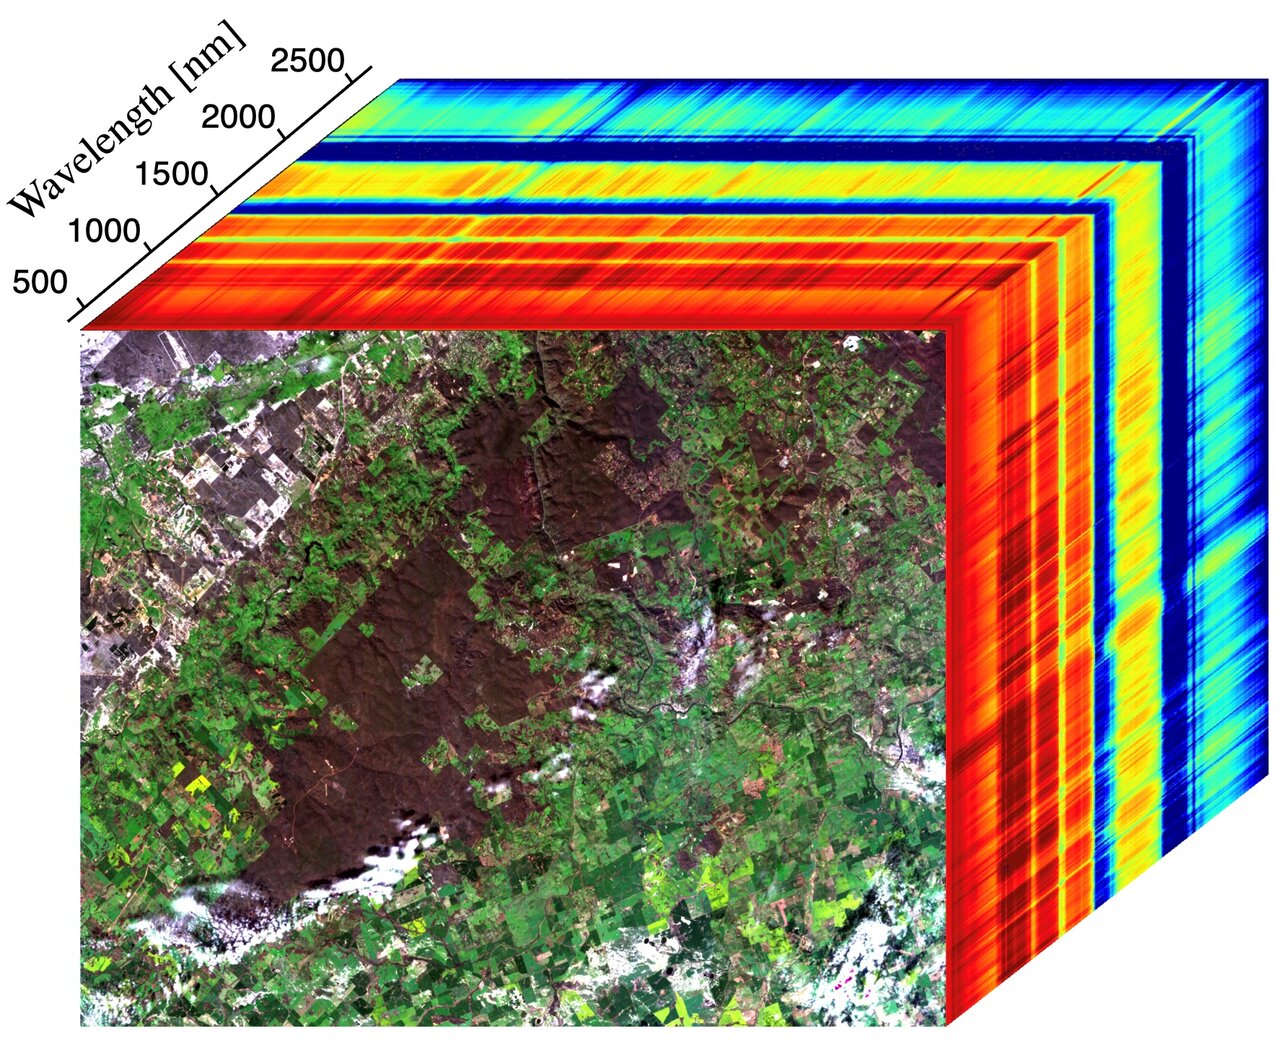 This image shows the first measurements taken by EMIT on July 27, 2022, as it passed over Western Australia. The image at the front of the cube shows a mix of materials in Western Australia, including exposed soil (brown), vegetation (dark green), agricultural fields (light green), a small river, and clouds. The rainbow colors extending through the main part of the cube are the spectral fingerprints from corresponding spots in the front image. 

Credit: NASA/JPL-Caltech